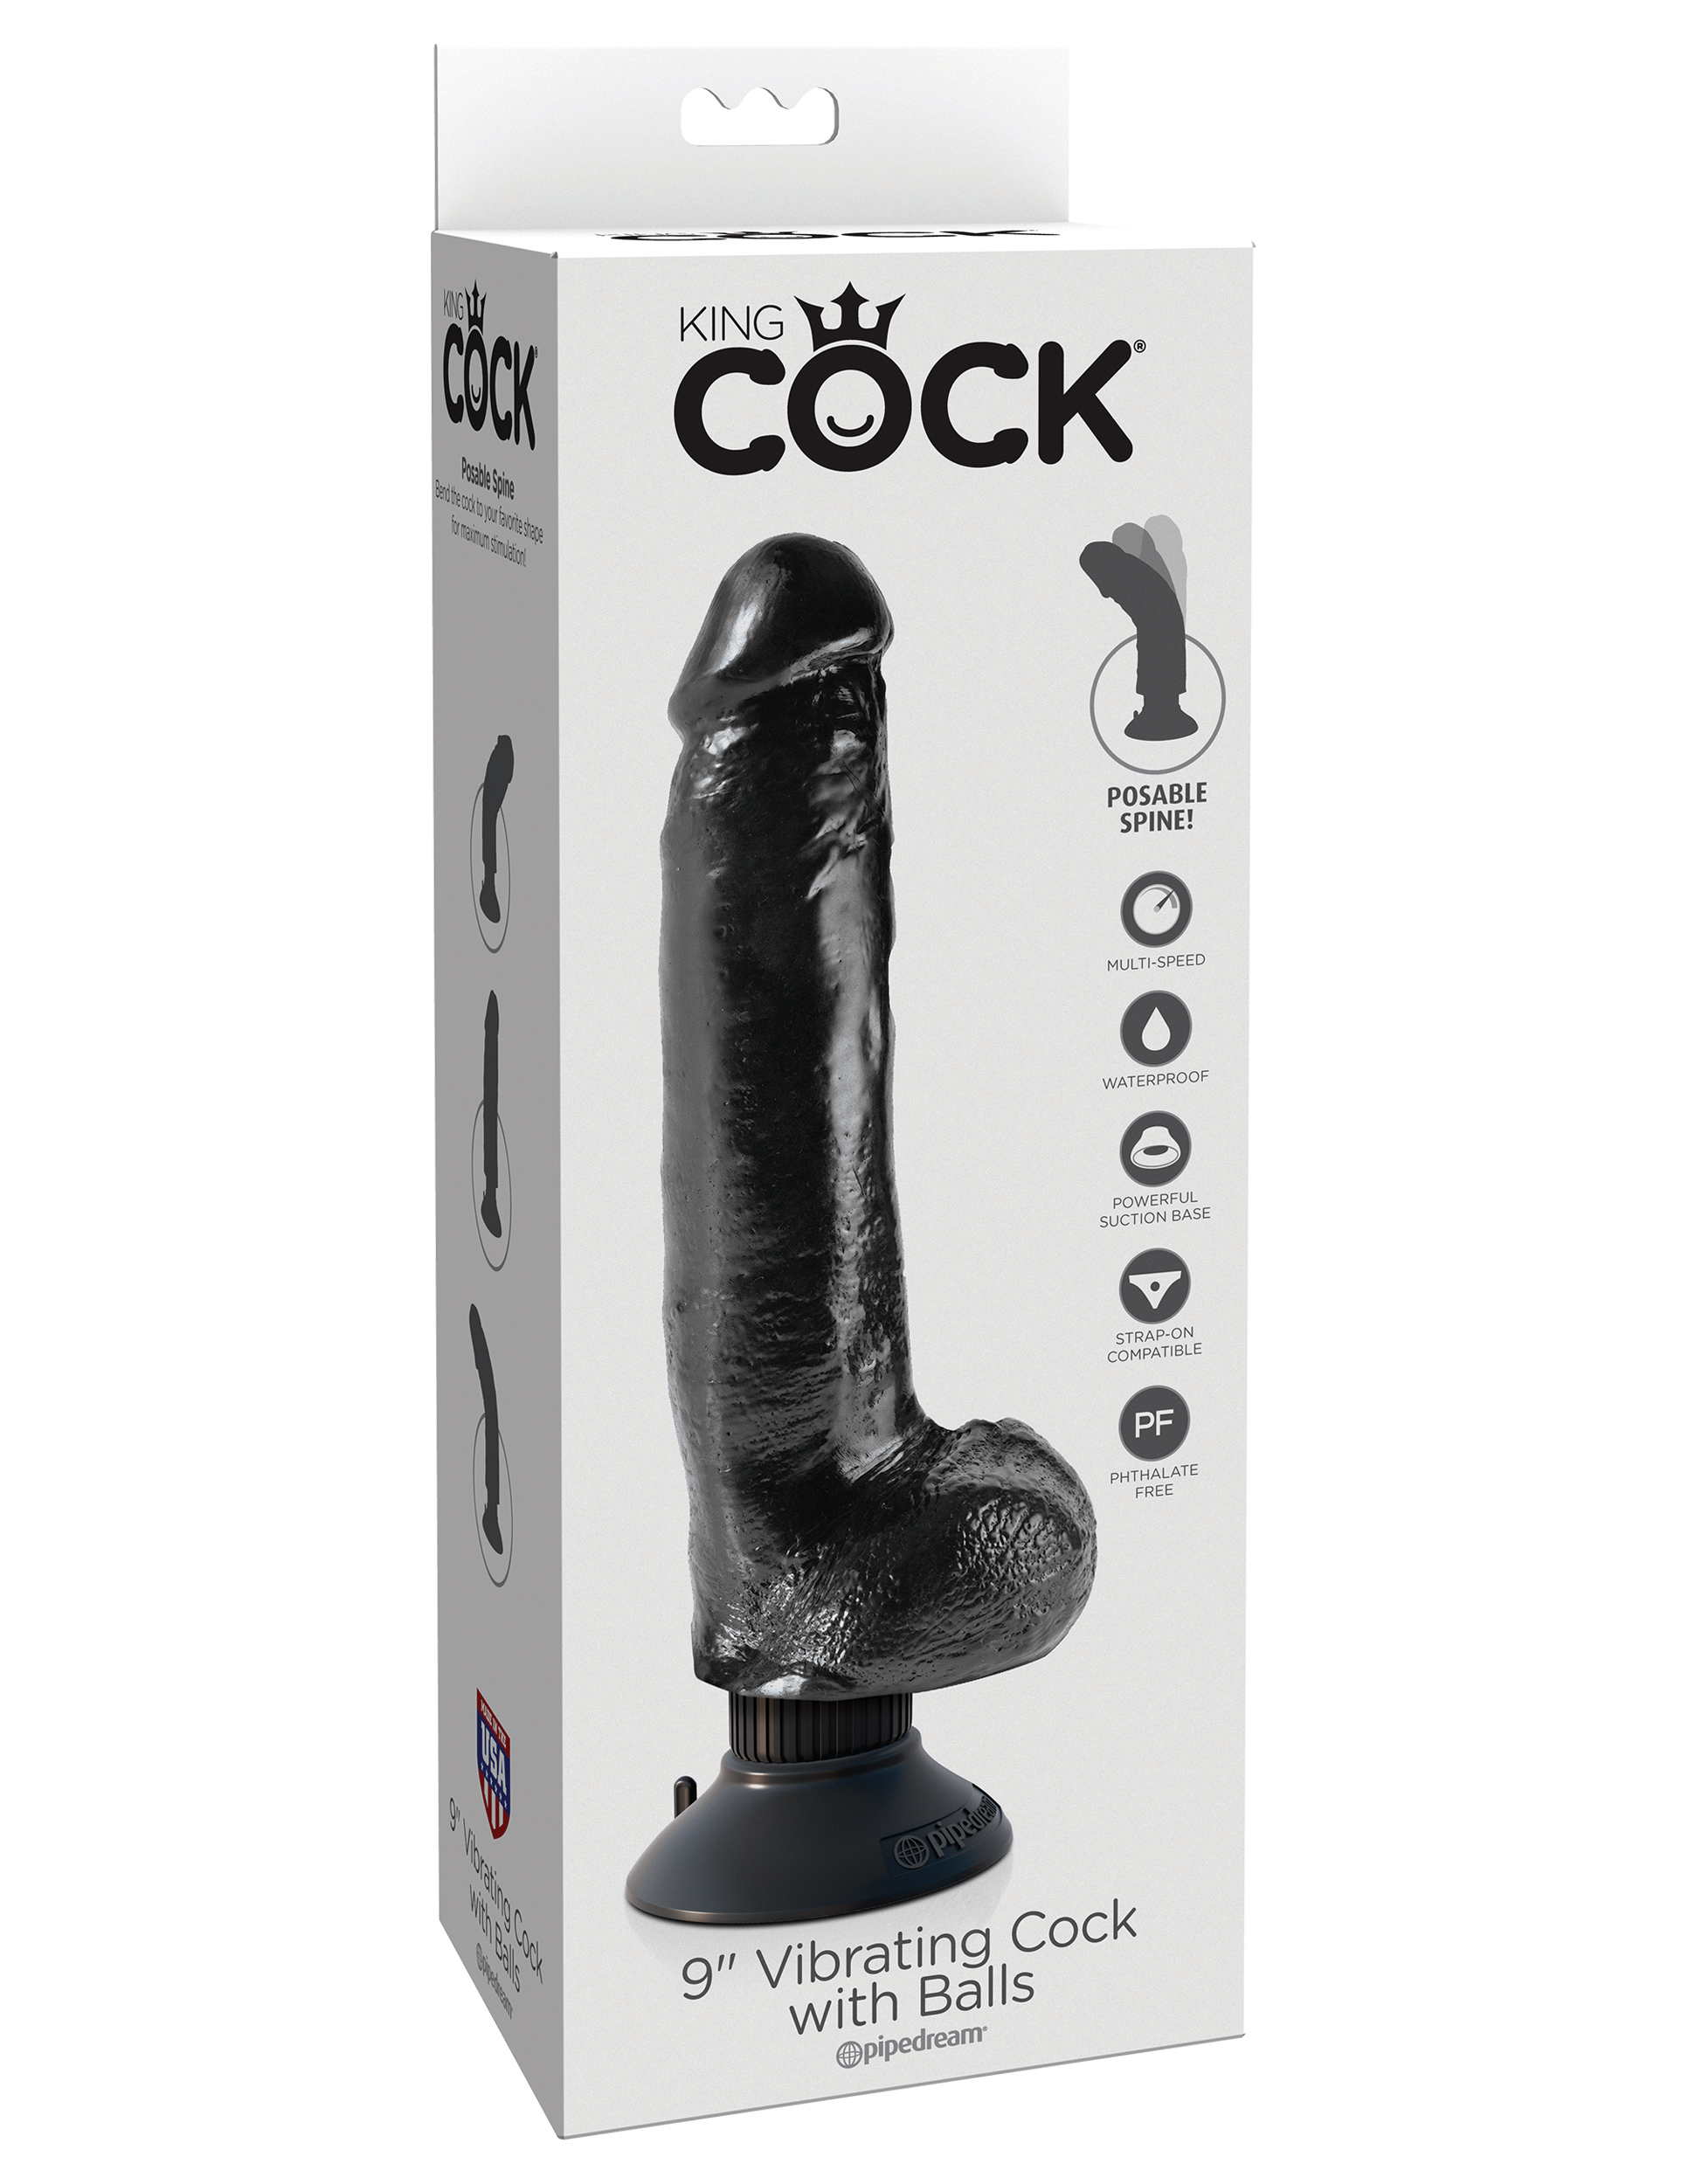  31    9 Vibrating Cock with Balls 